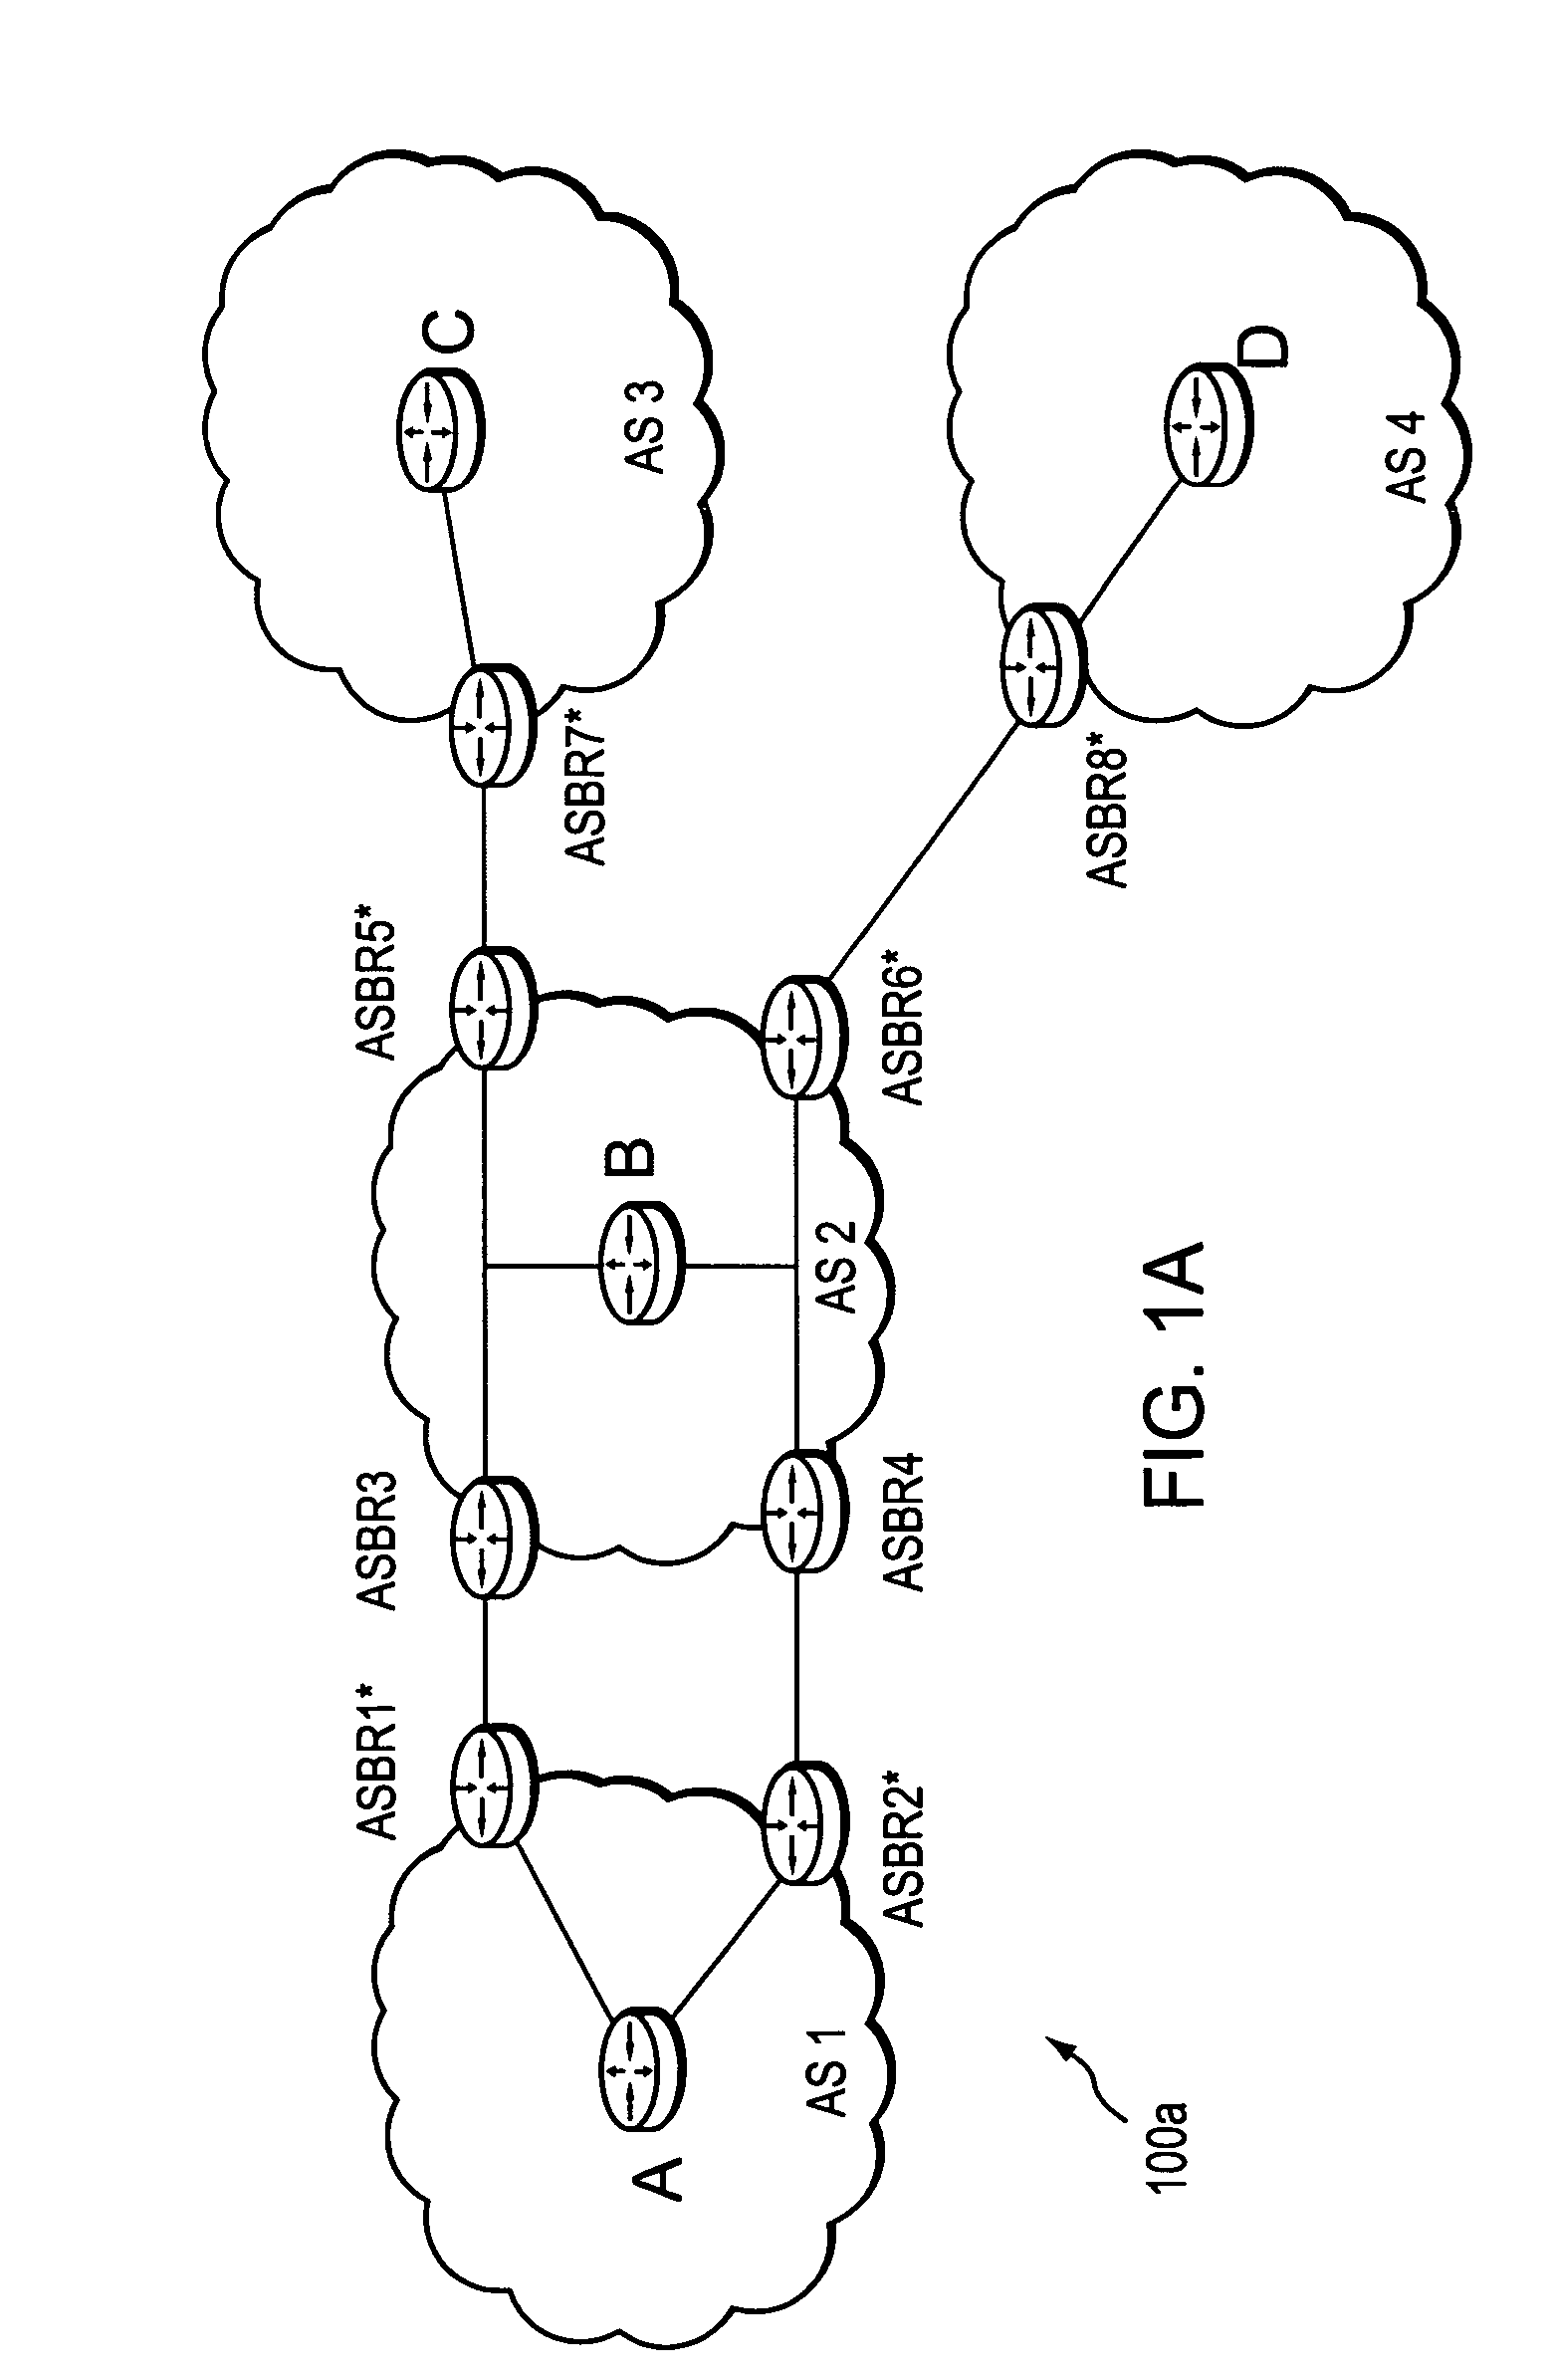 System and method for retrieving computed paths from a path computation element using a path key